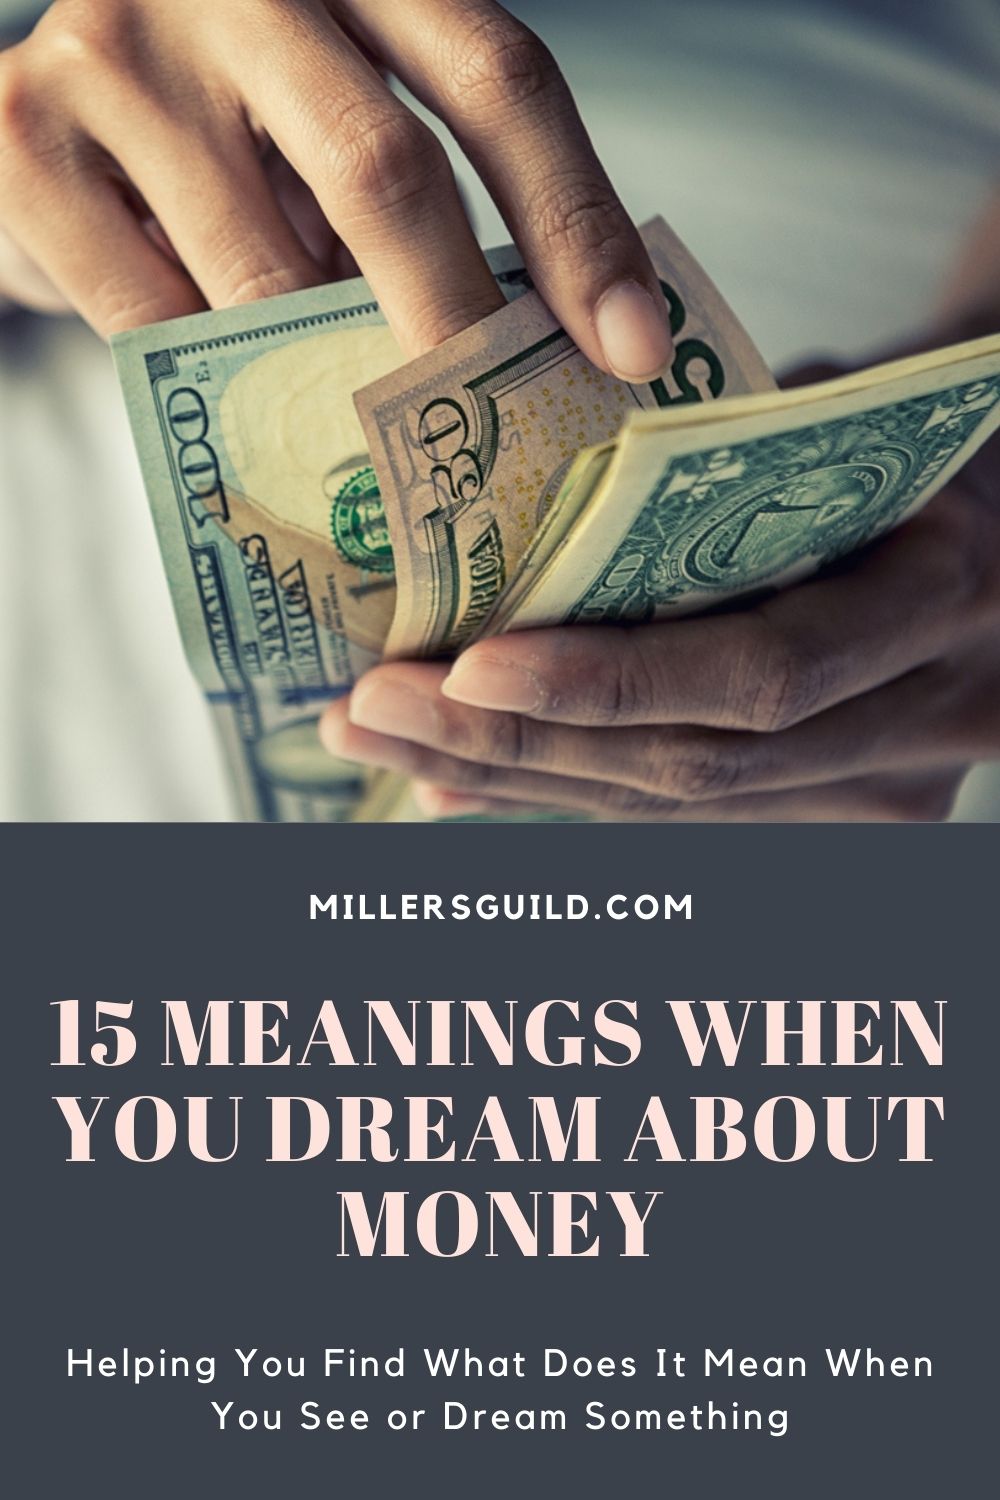 What Does It Symbolize To Dream Of Losing Money?